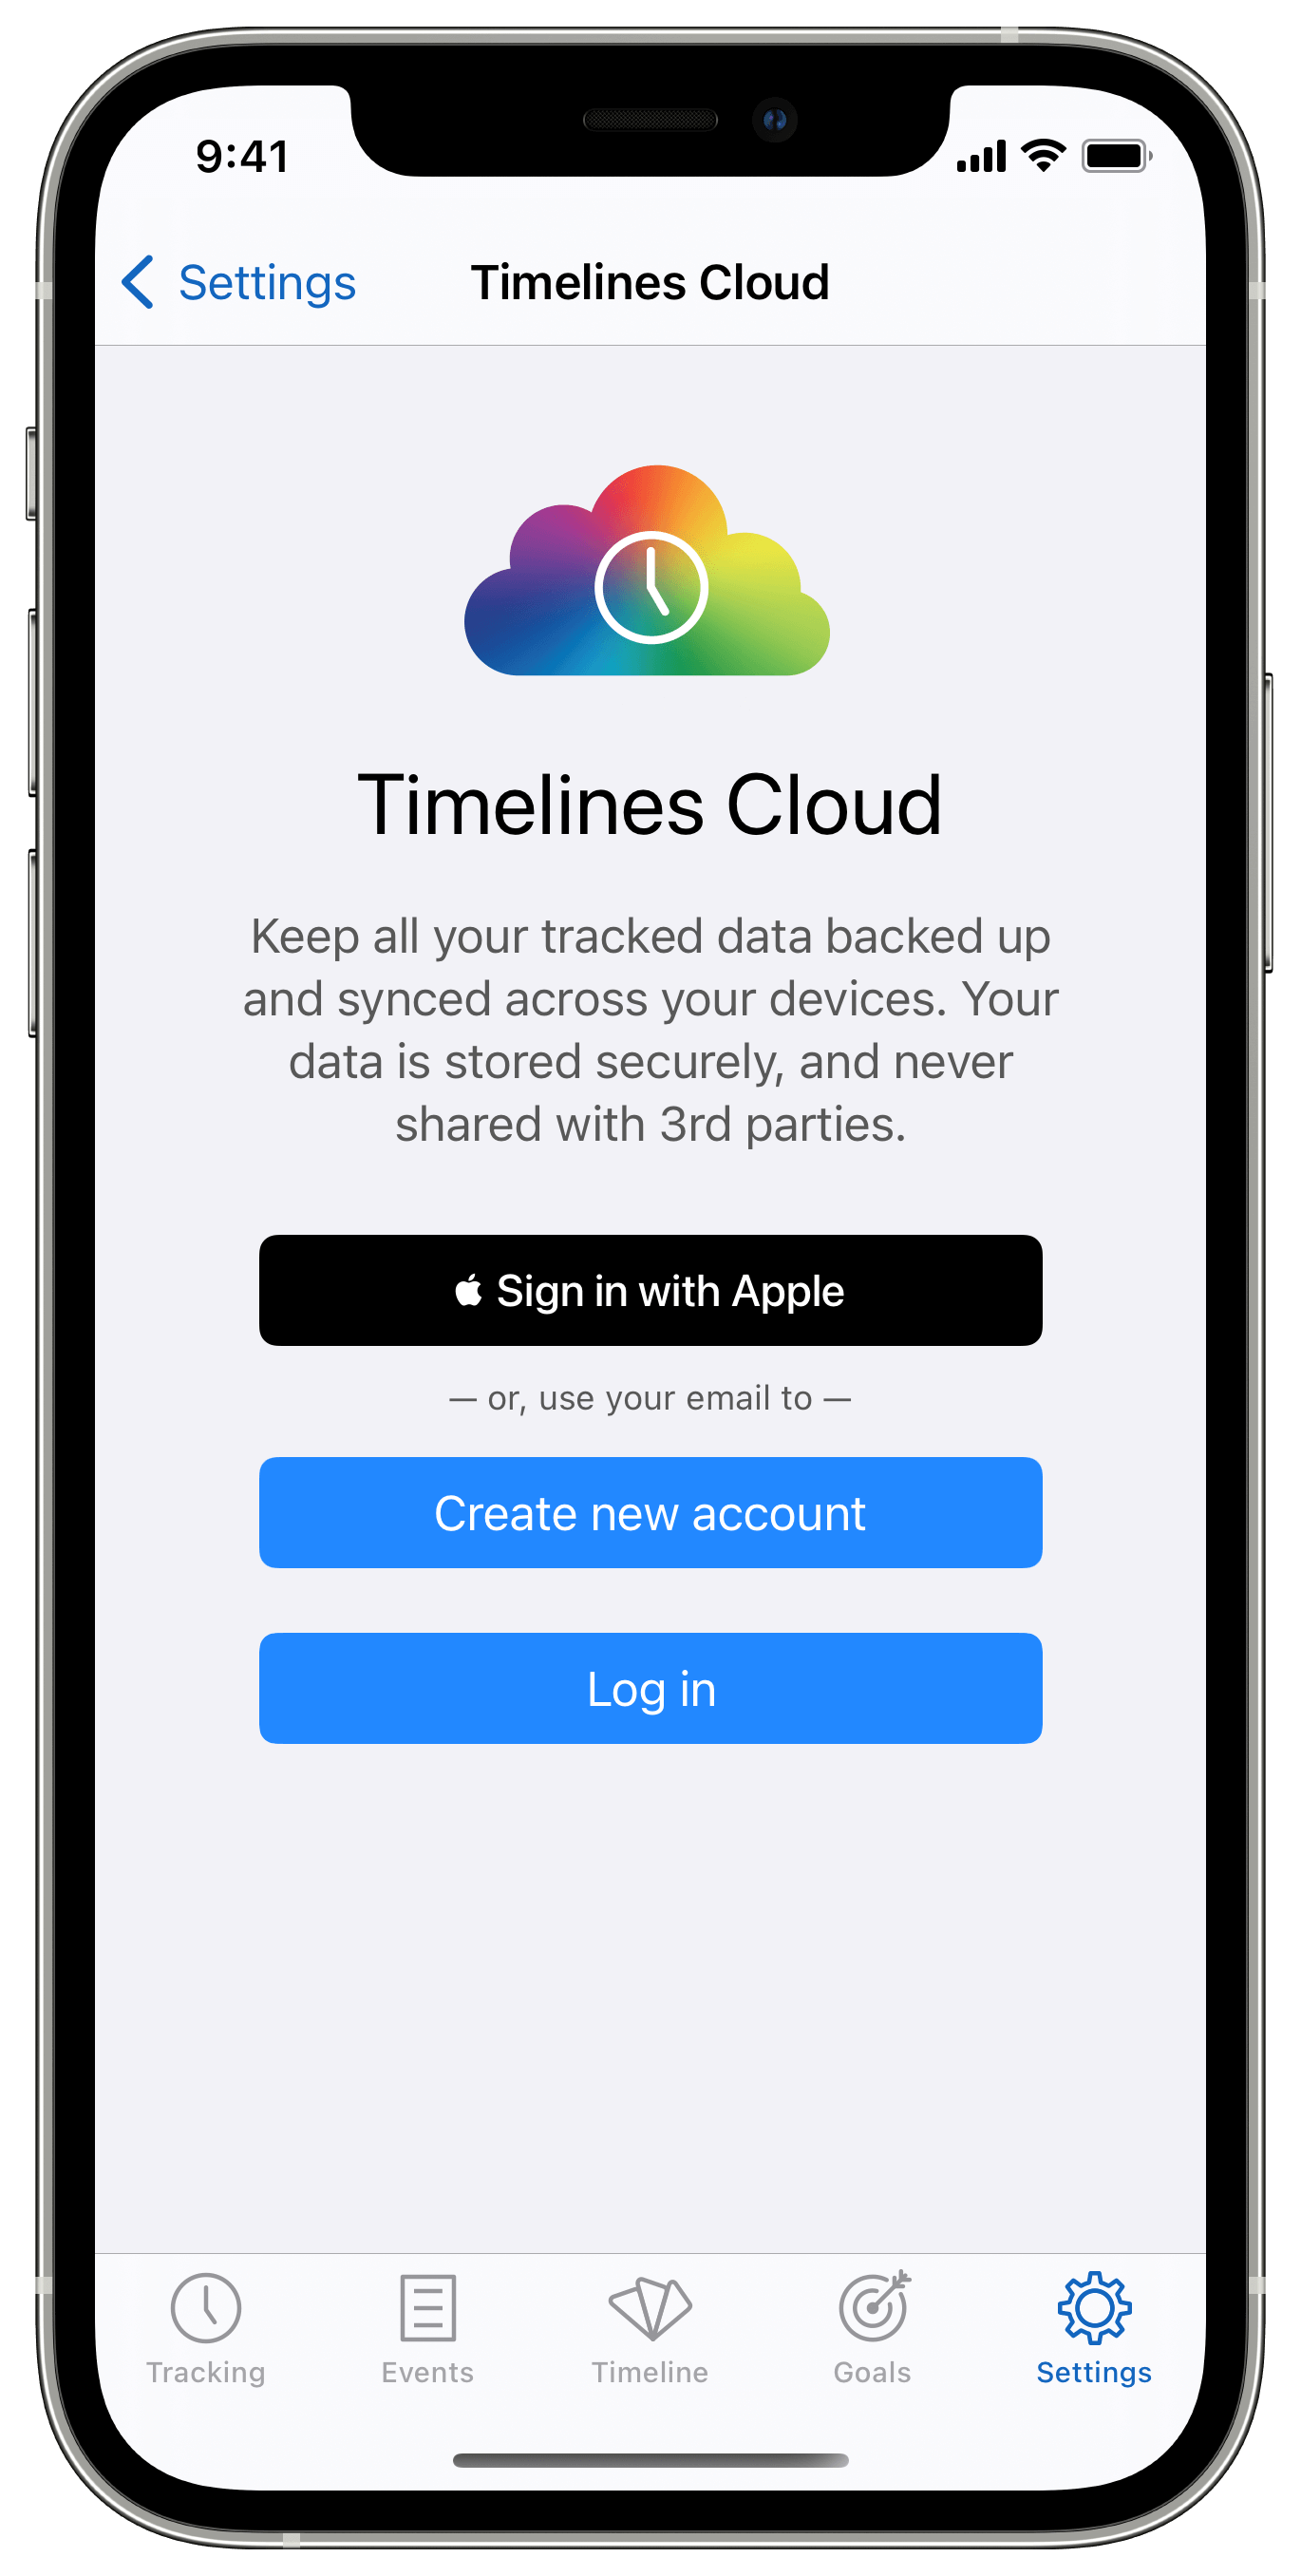 Introducing Timelines 3.0